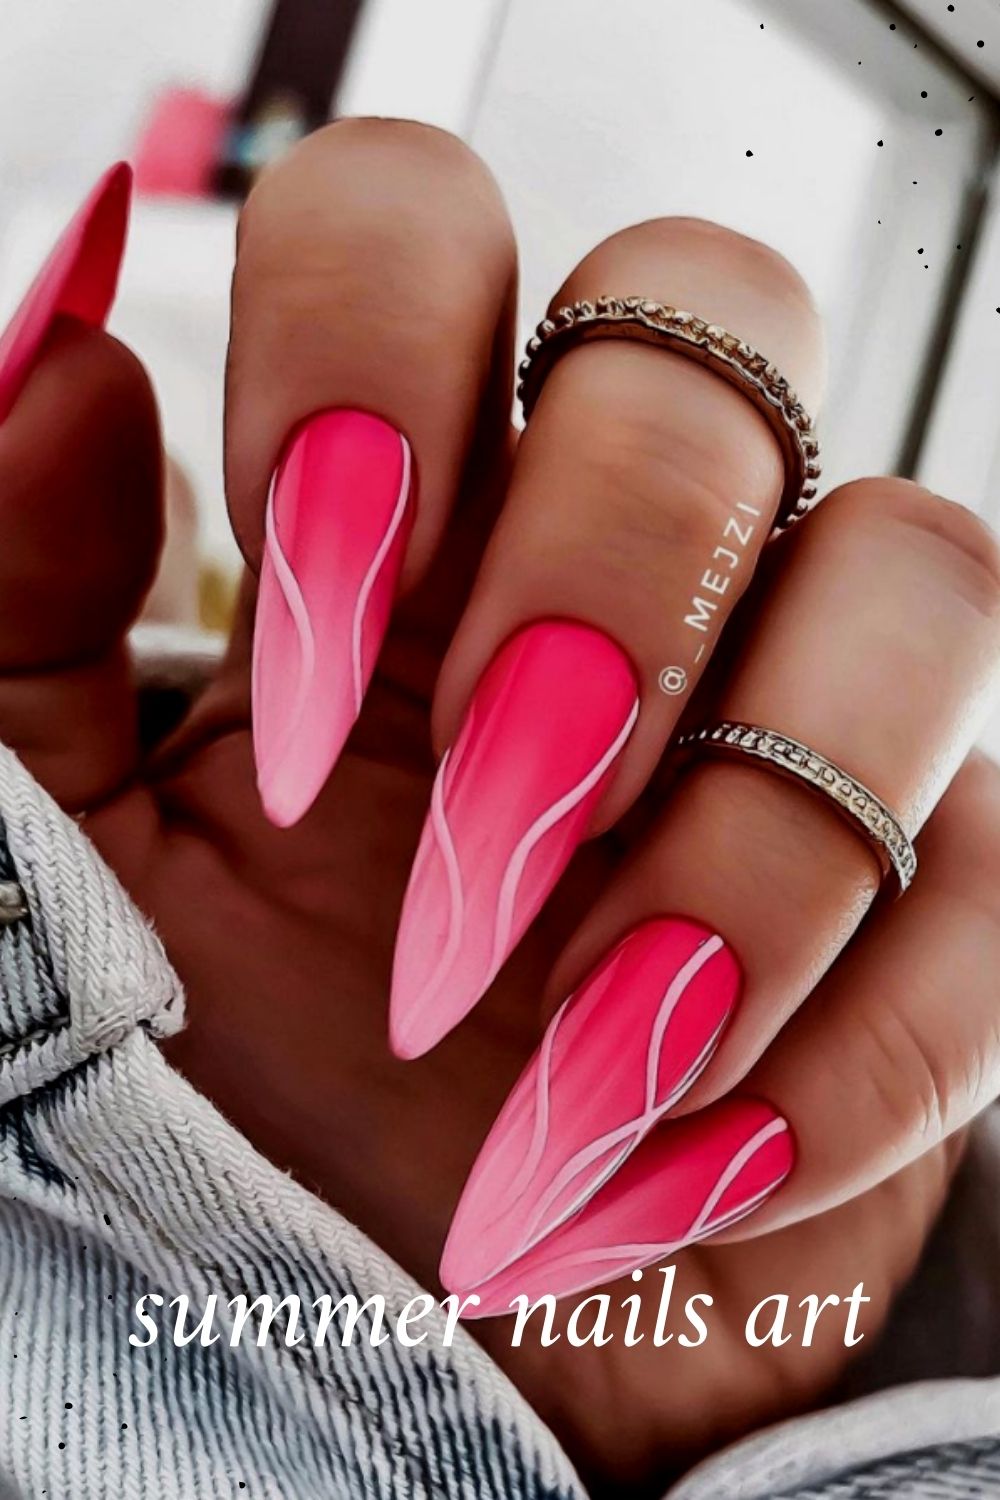 Almond nails designs with pink heart